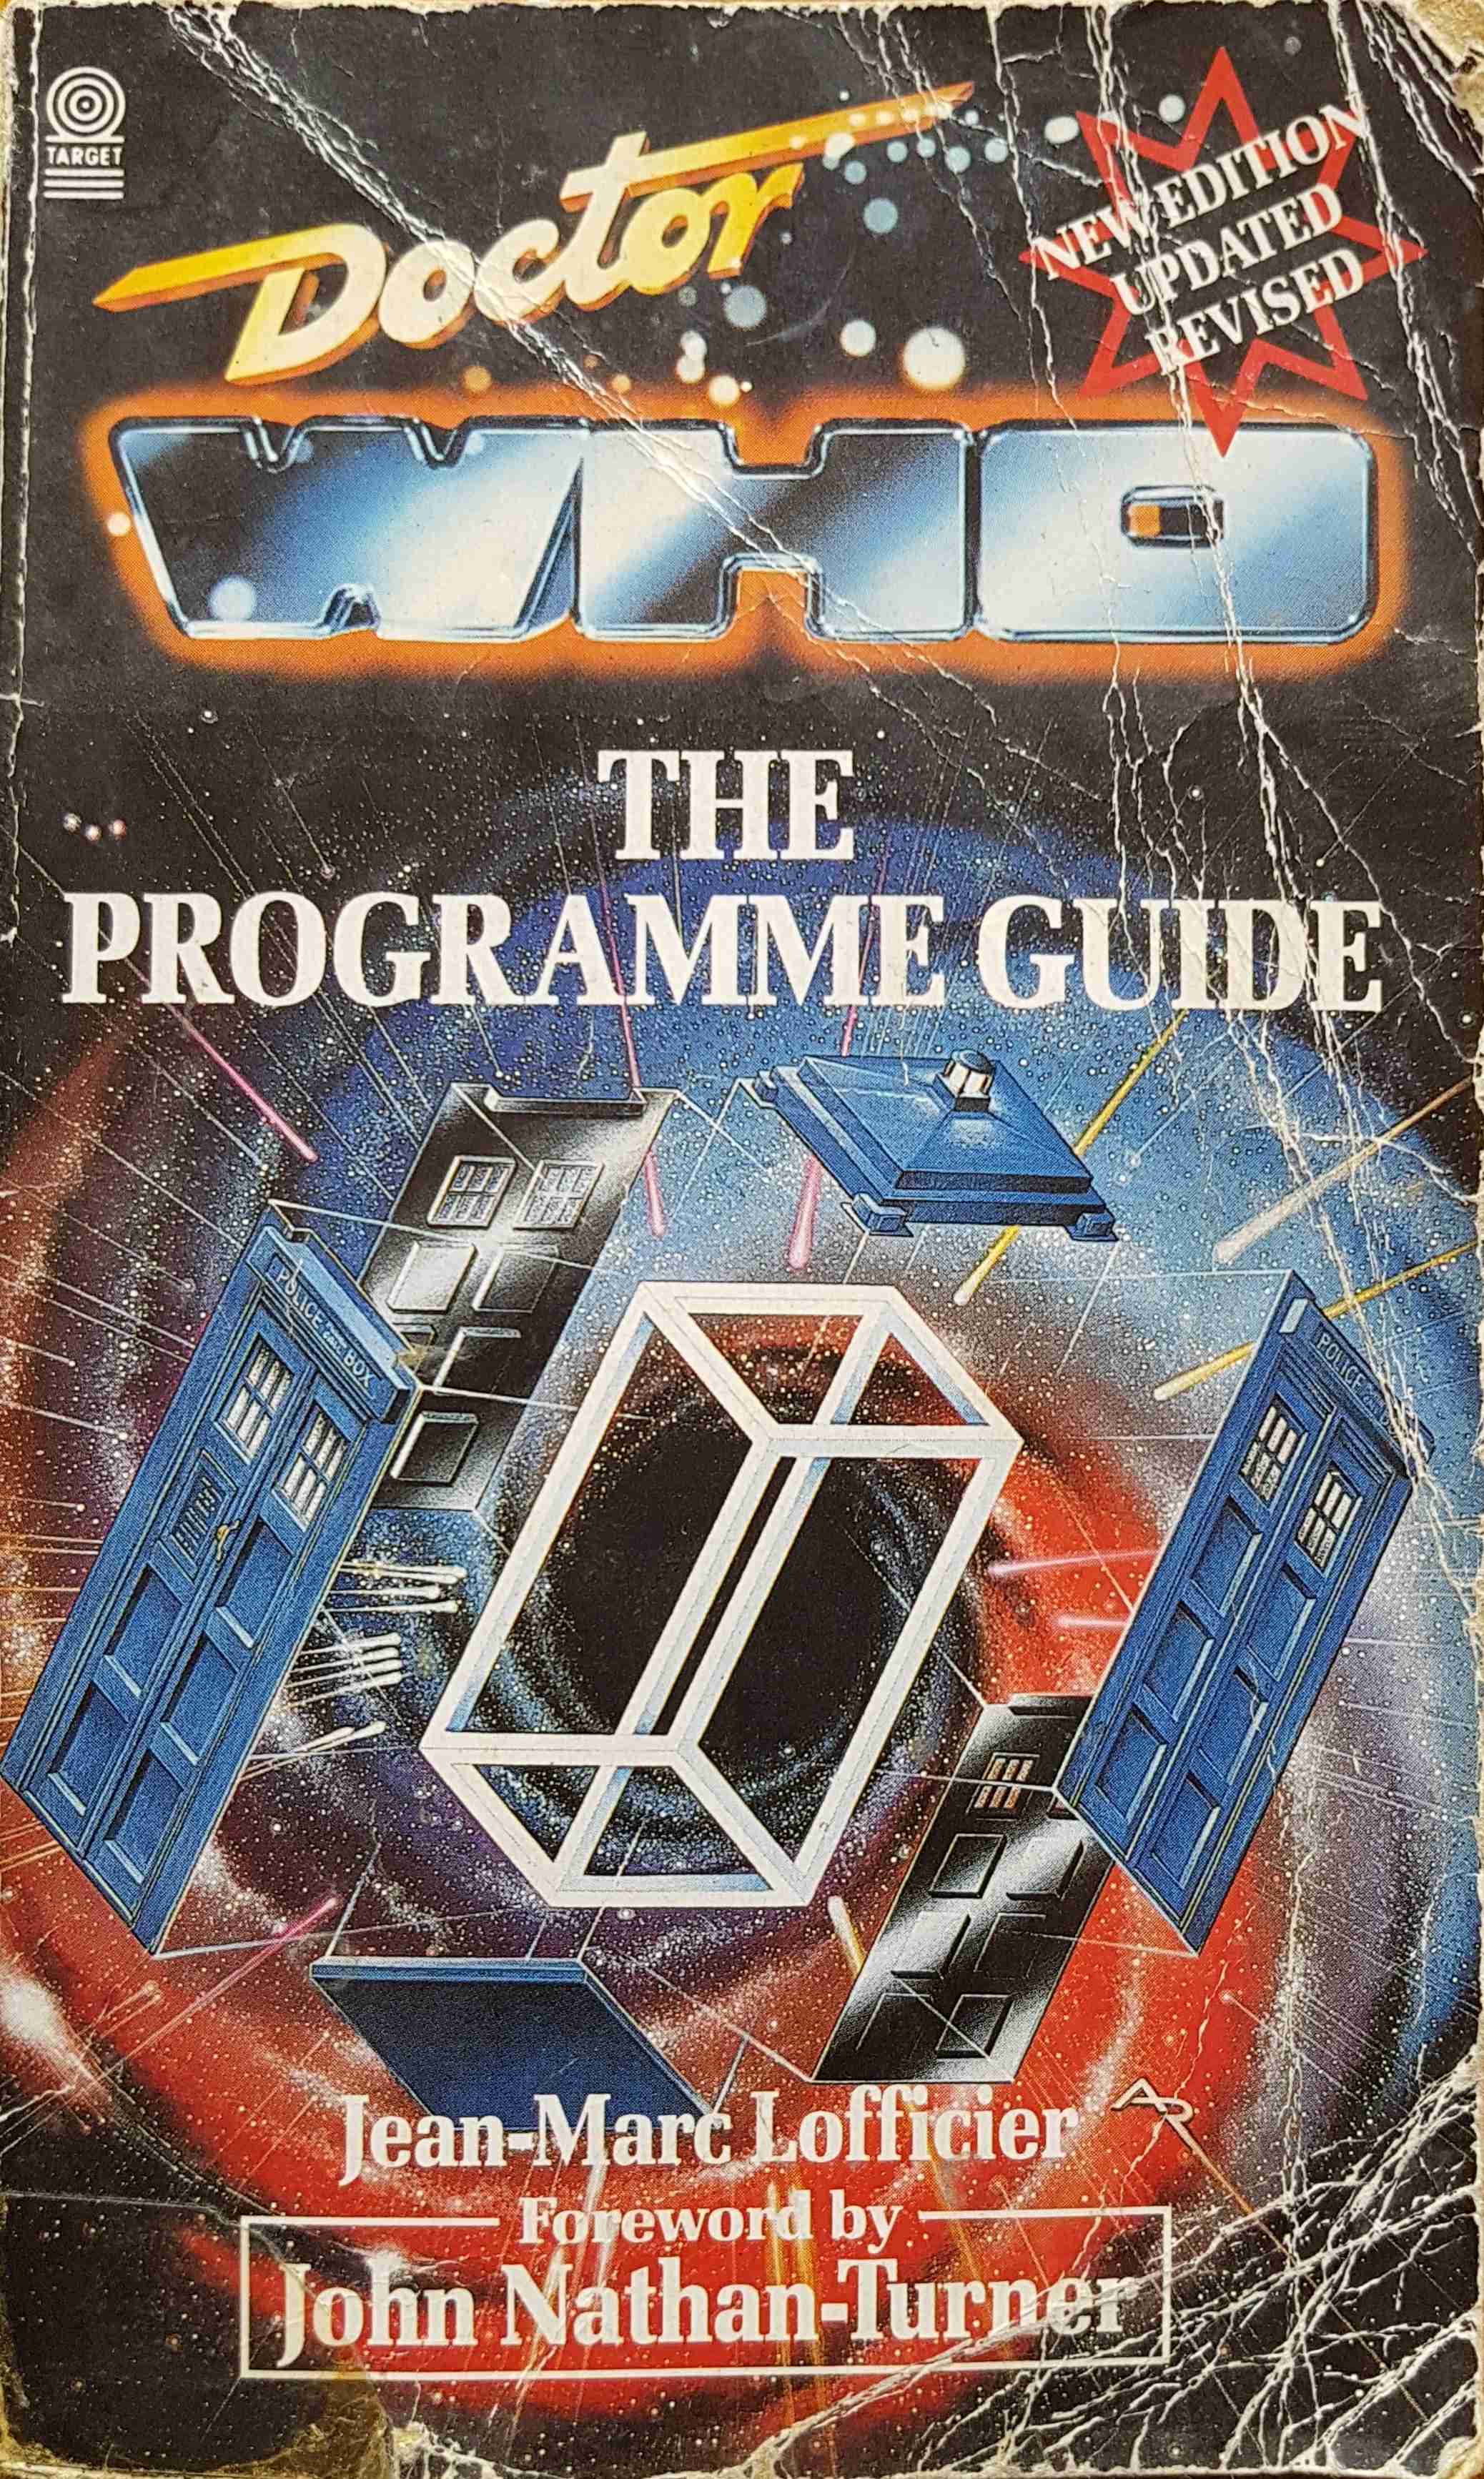 Picture of 0-426-20342-9 Doctor Who - Programme guide by artist Jean-Marc L\'officier from the BBC records and Tapes library